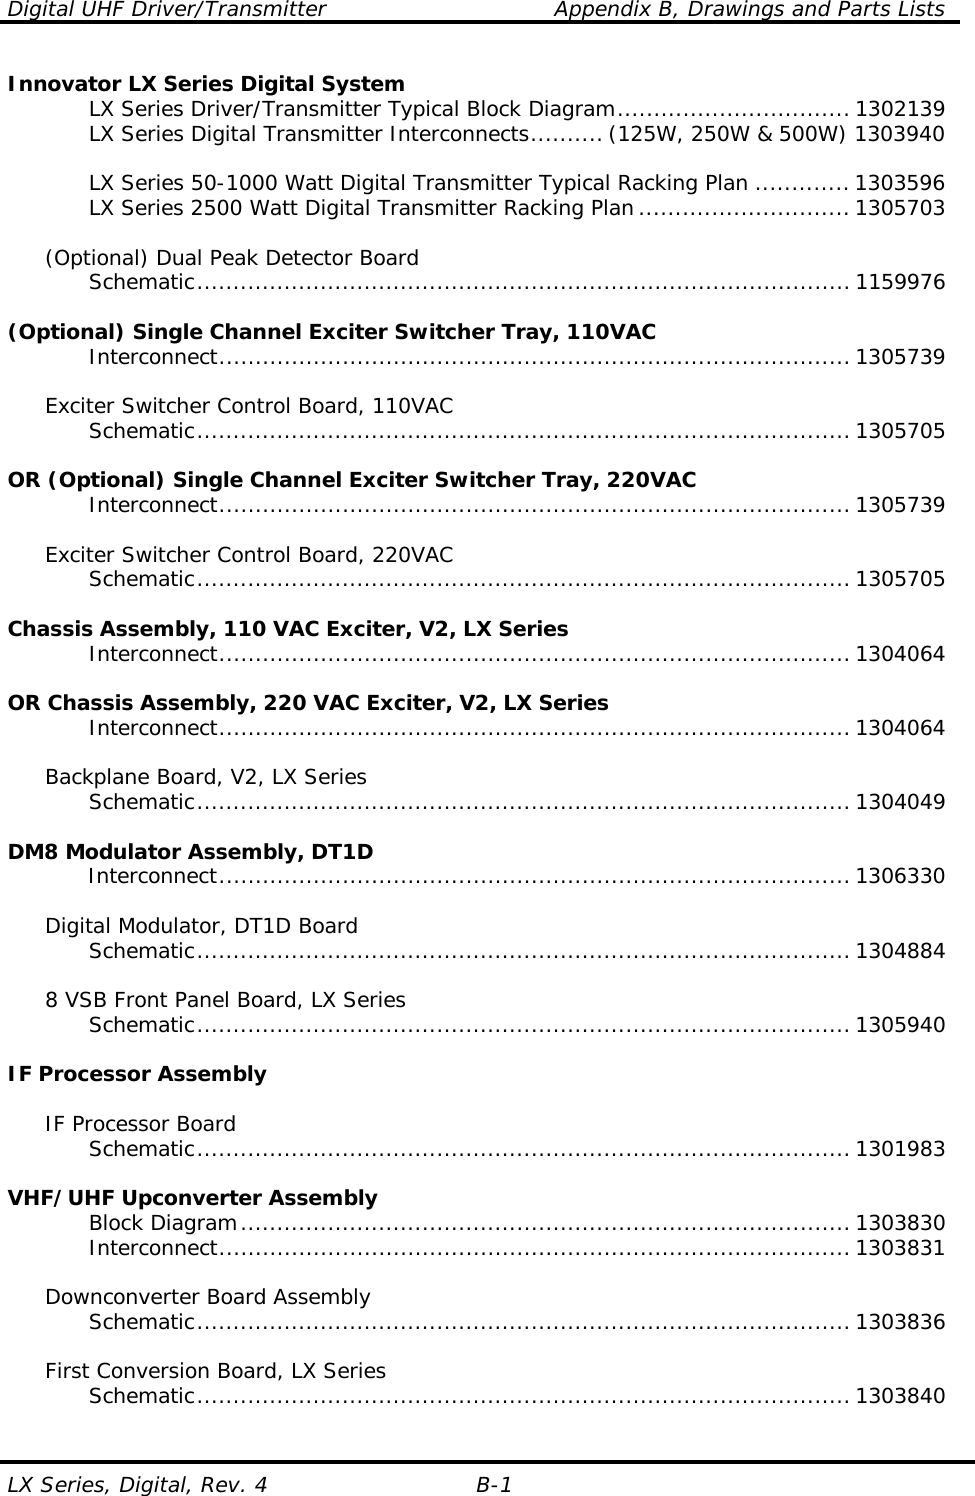 Digital UHF Driver/Transmitter    Appendix B, Drawings and Parts Lists LX Series, Digital, Rev. 4  B-1 Innovator LX Series Digital System     LX Series Driver/Transmitter Typical Block Diagram................................1302139     LX Series Digital Transmitter Interconnects.......... (125W, 250W &amp; 500W) 1303940      LX Series 50-1000 Watt Digital Transmitter Typical Racking Plan ............. 1303596     LX Series 2500 Watt Digital Transmitter Racking Plan.............................1305703    (Optional) Dual Peak Detector Board    Schematic.......................................................................................... 1159976  (Optional) Single Channel Exciter Switcher Tray, 110VAC    Interconnect....................................................................................... 1305739    Exciter Switcher Control Board, 110VAC    Schematic.......................................................................................... 1305705  OR (Optional) Single Channel Exciter Switcher Tray, 220VAC    Interconnect....................................................................................... 1305739     Exciter Switcher Control Board, 220VAC    Schematic.......................................................................................... 1305705     Chassis Assembly, 110 VAC Exciter, V2, LX Series    Interconnect....................................................................................... 1304064     OR Chassis Assembly, 220 VAC Exciter, V2, LX Series    Interconnect....................................................................................... 1304064       Backplane Board, V2, LX Series    Schematic.......................................................................................... 1304049     DM8 Modulator Assembly, DT1D    Interconnect....................................................................................... 1306330       Digital Modulator, DT1D Board    Schematic.......................................................................................... 1304884       8 VSB Front Panel Board, LX Series    Schematic.......................................................................................... 1305940     IF Processor Assembly       IF Processor Board    Schematic.......................................................................................... 1301983     VHF/UHF Upconverter Assembly    Block Diagram.................................................................................... 1303830    Interconnect....................................................................................... 1303831       Downconverter Board Assembly    Schematic.......................................................................................... 1303836       First Conversion Board, LX Series    Schematic.......................................................................................... 1303840     